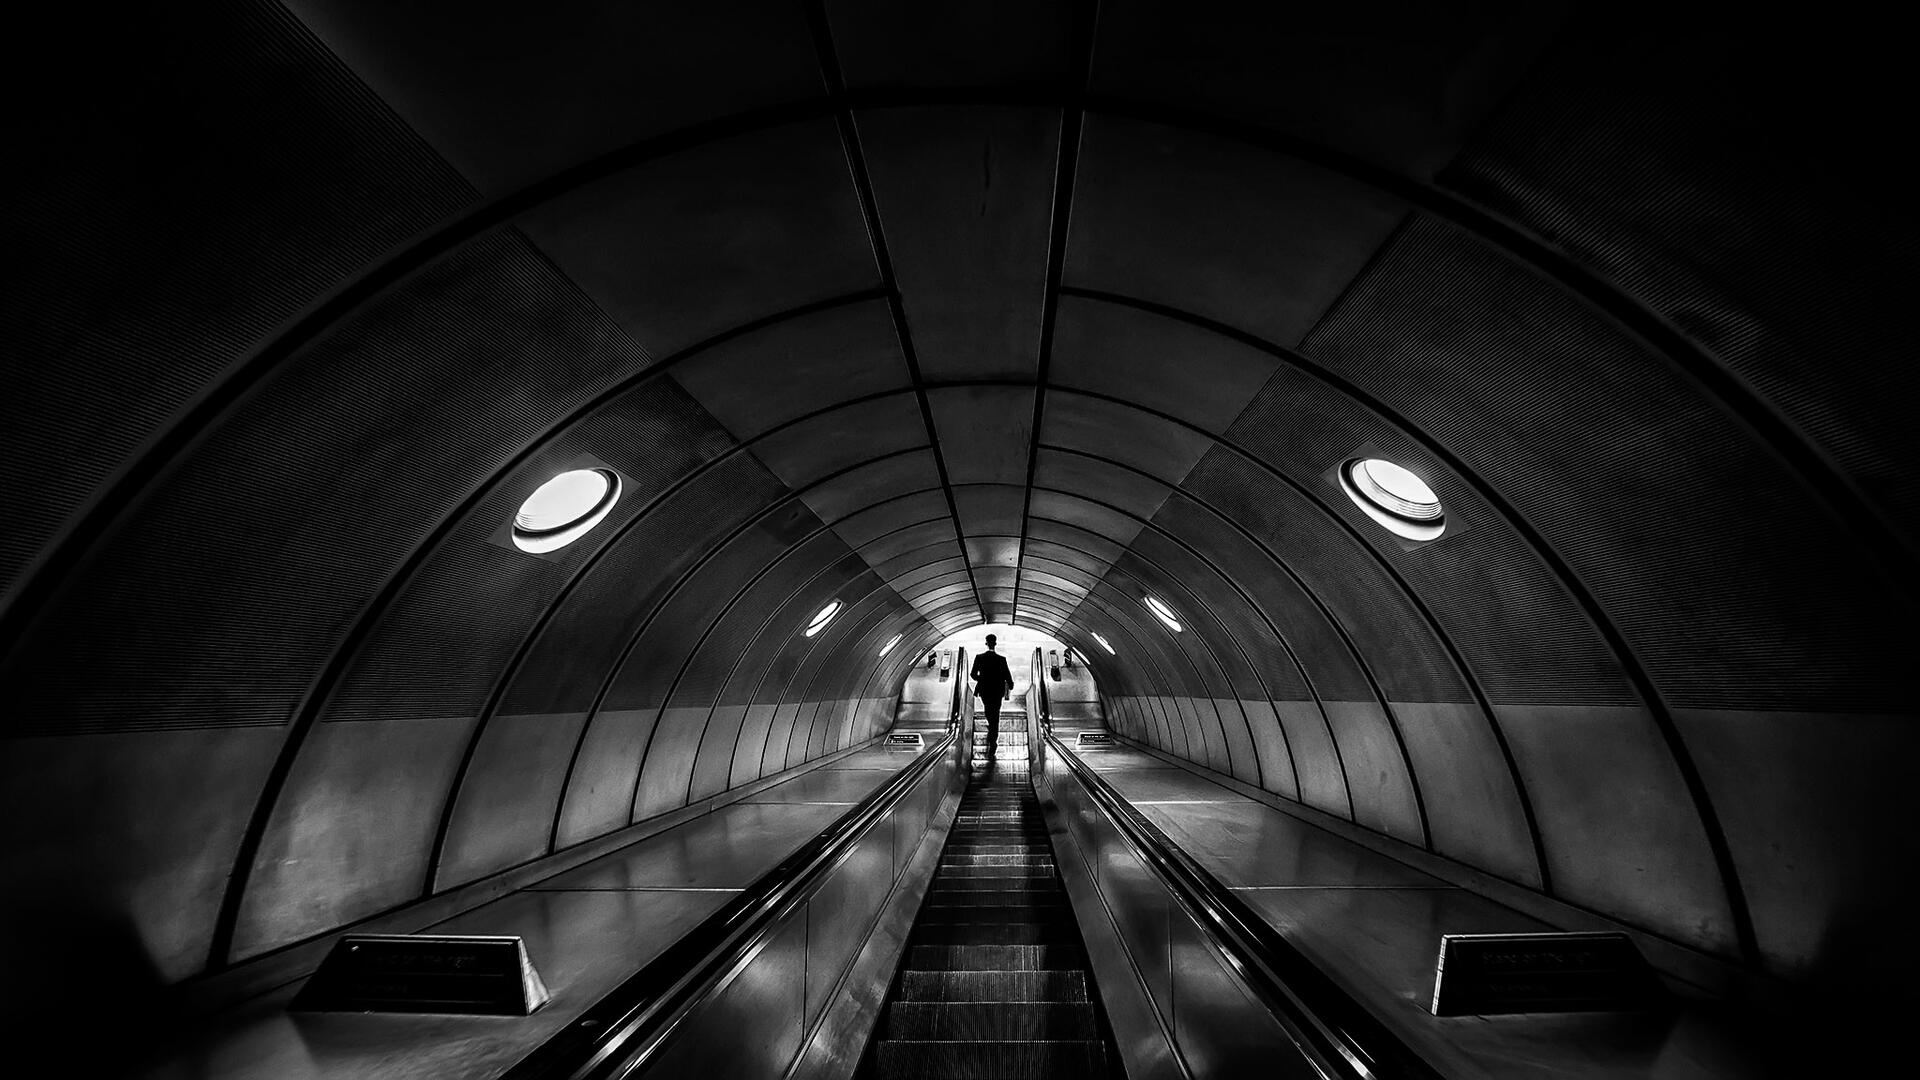 Brief and entries | People Walking Underground - People photo contest ...